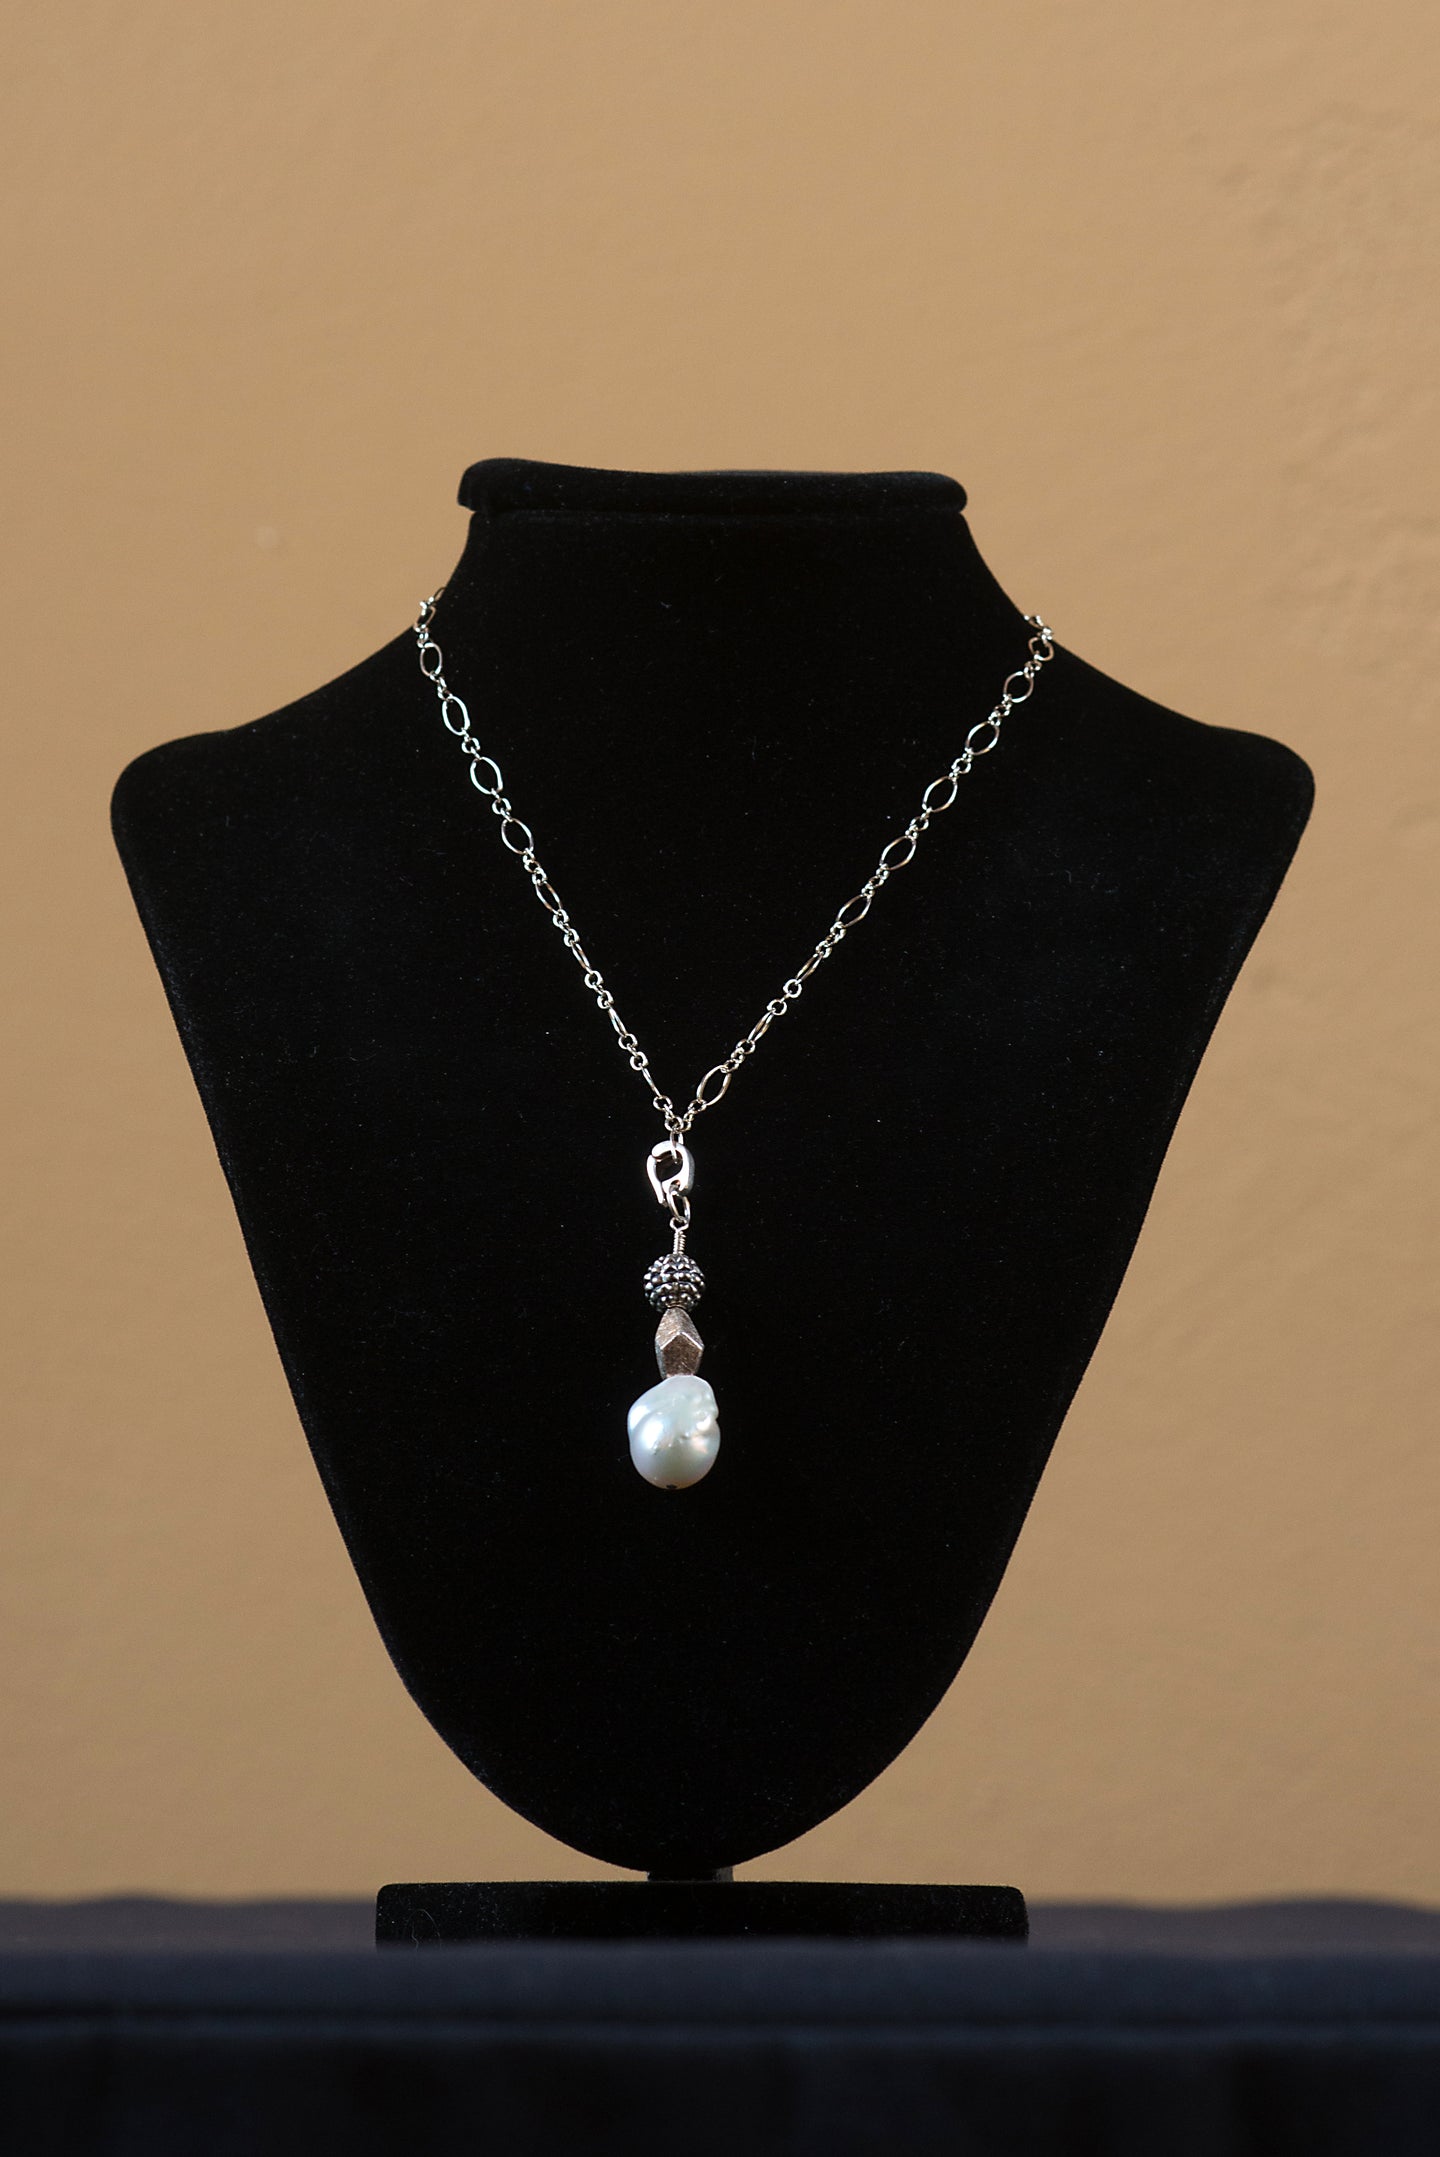 Necklace - Silver chain, Baroque Pearl & Sterling Silver Beads